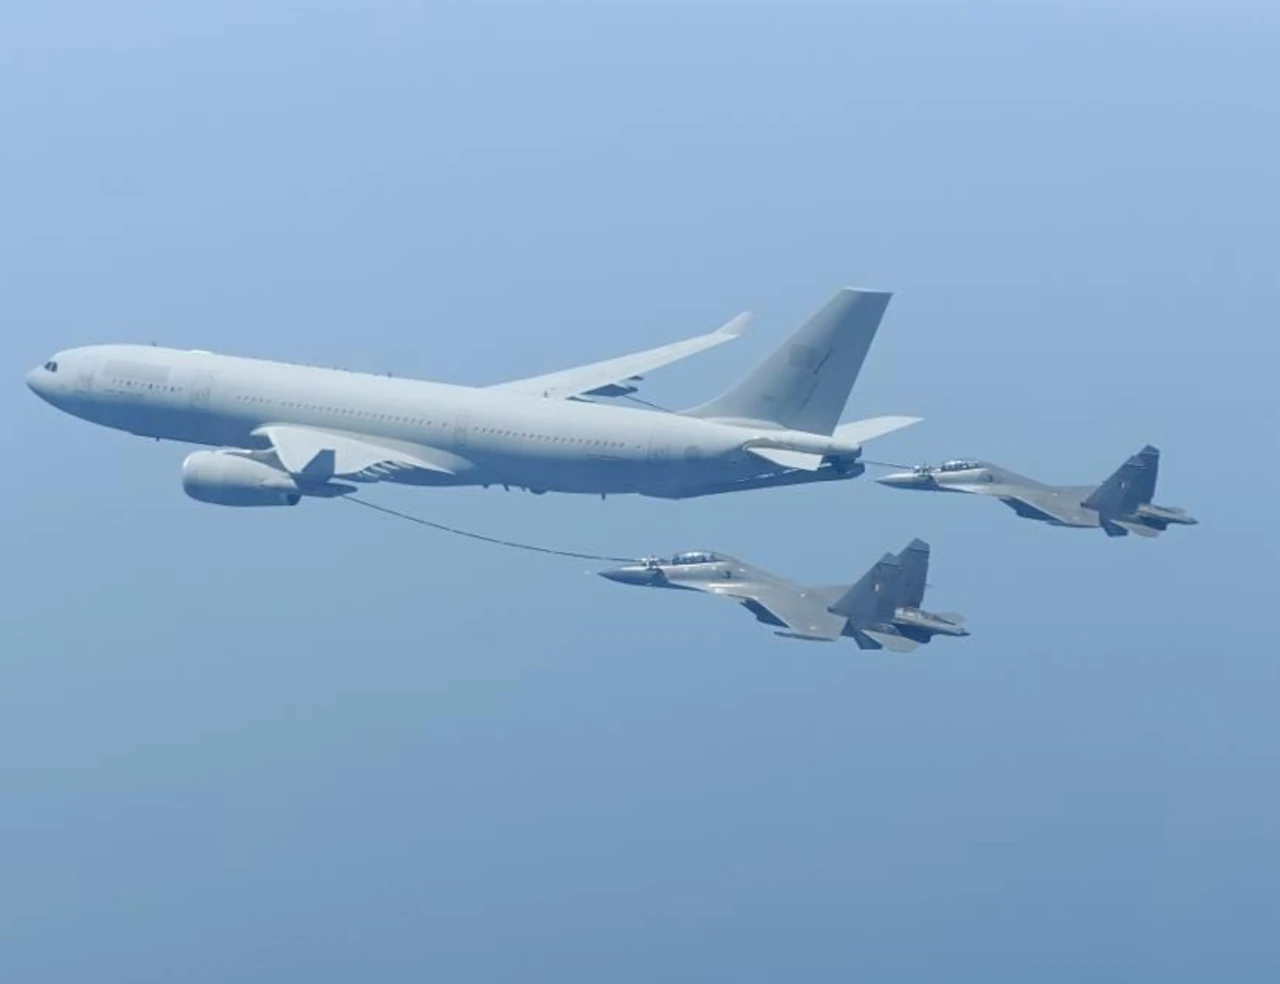 Indian Air Force Sukhoi Su-30 MkIs getting refueled by a UAE Air Force Airbus A330 MRTT tanker